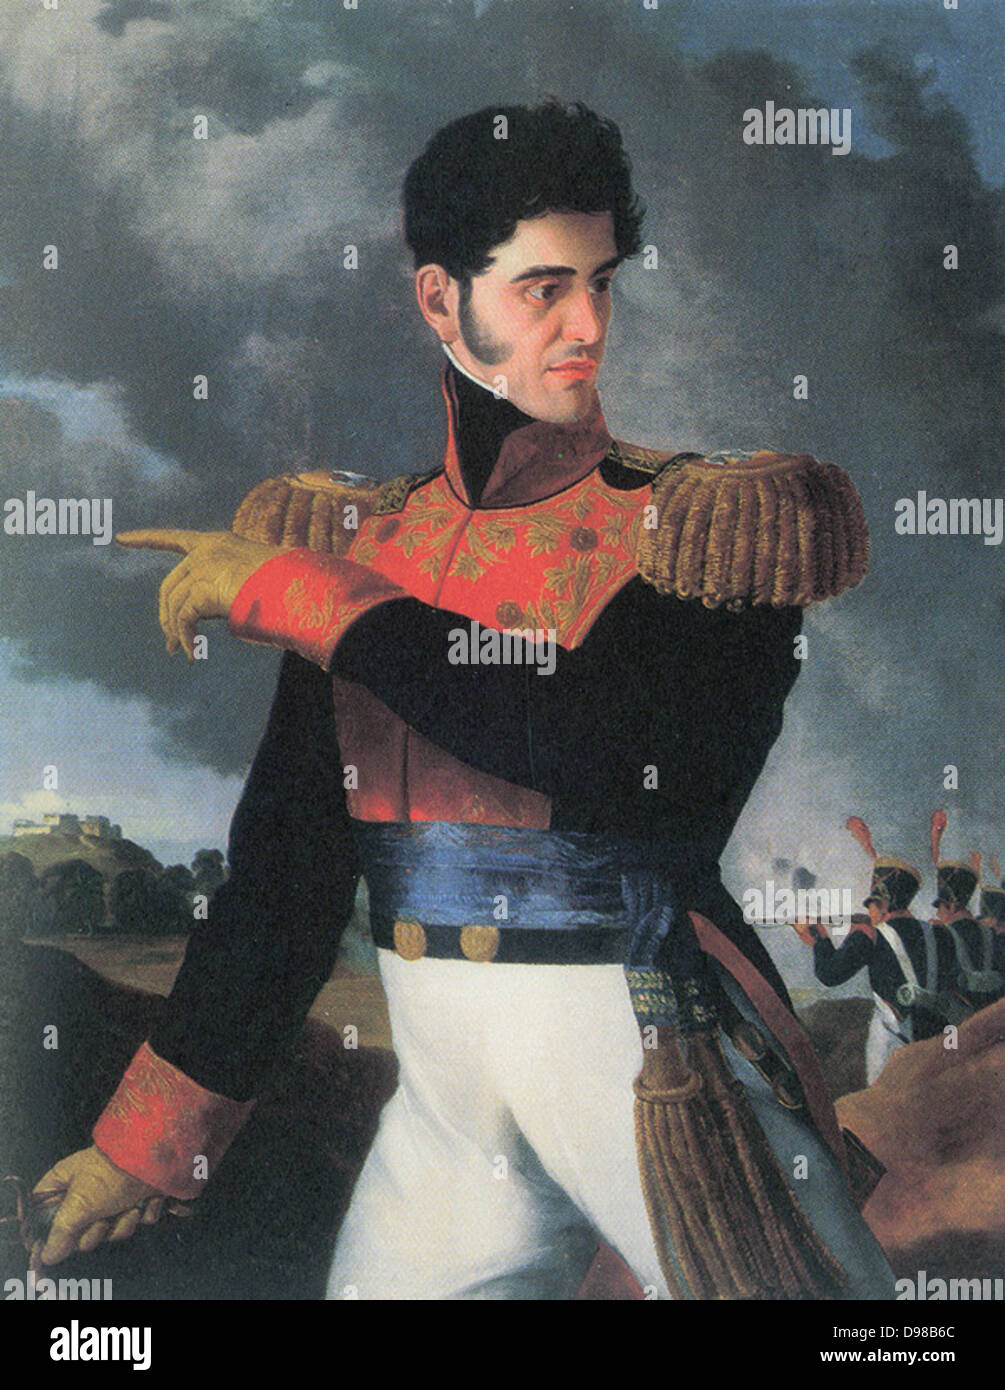 Antonio López de Santa Anna (1794-1876) Mexican soldier and political leader. In 1822 he declared his loyalty to Augustin de Iturbide and the Republican movement. President of Mexico seven non-consecutive times in 22 years beginning in 1833. Painting of Santa Anna in military uniform with battle in background. Stock Photo